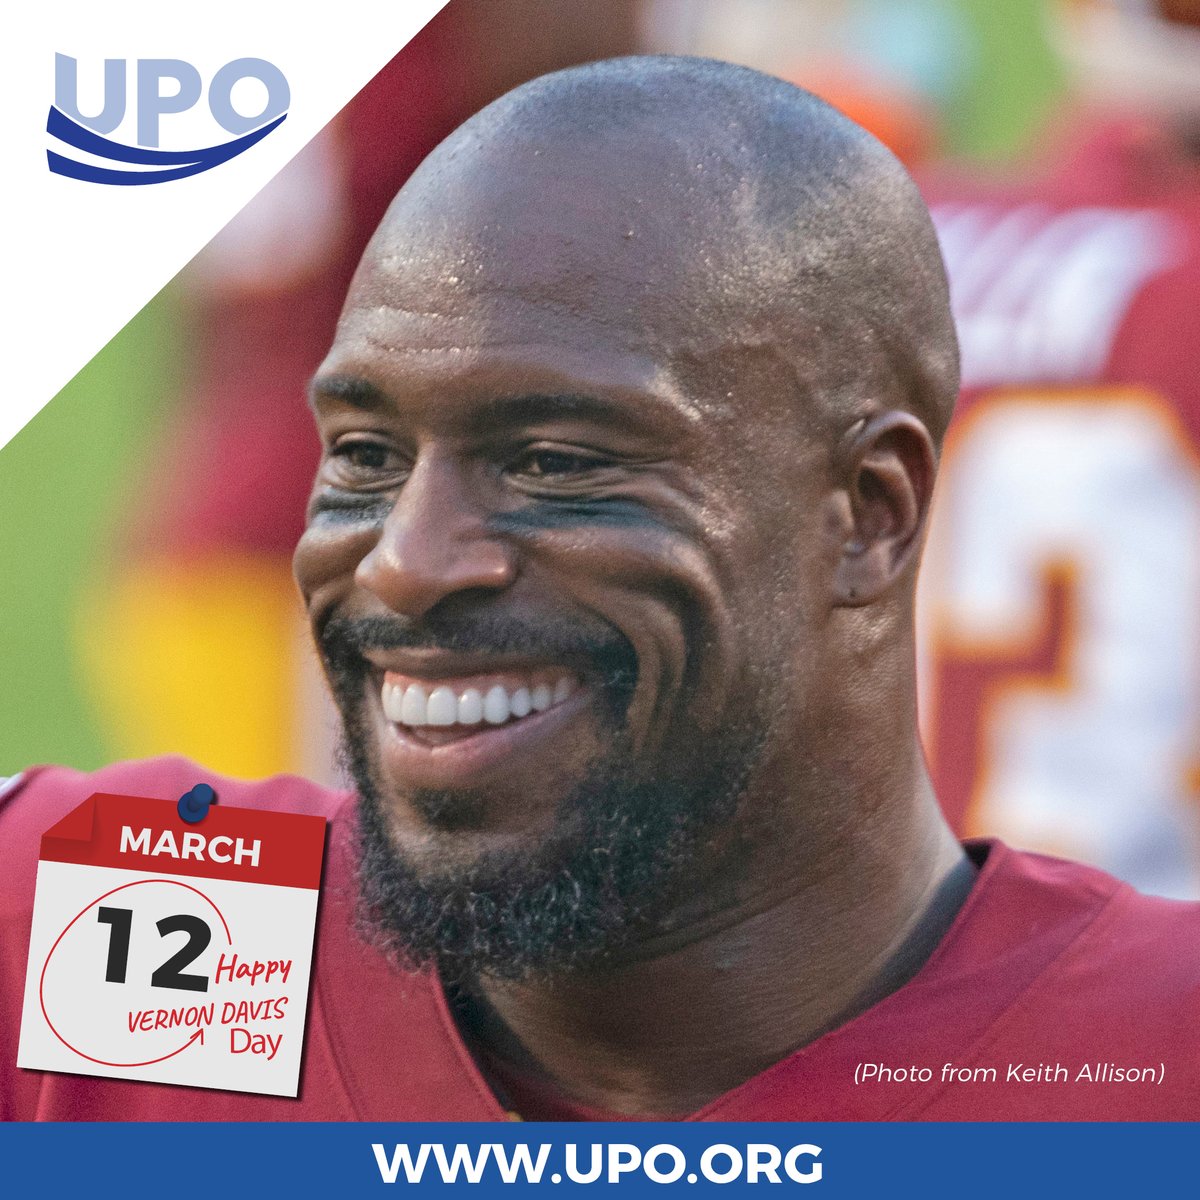 We are celebrating Vernon Davis Day in #DC! He was on the football field & knows the value of the education field. He helps children thrive through reading & the arts. Thank you, Vernon Davis — we applaud you! #PayItForward #UPOinDC @vernondavis85 @vontaedavis @JefferiesCraig